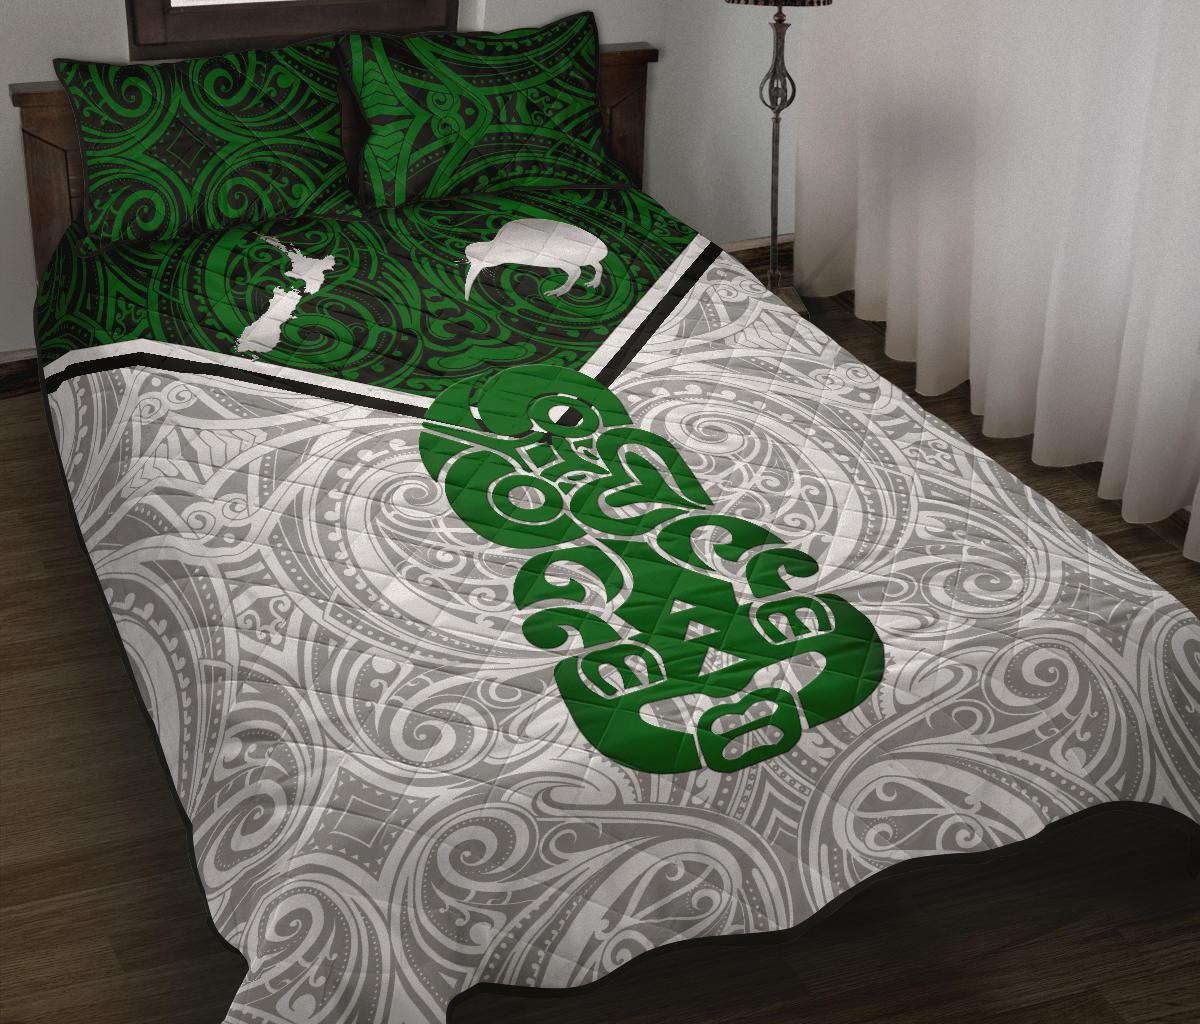 New Zealand Maori Rugby Quilt Bed Set Pride Version - White White - Polynesian Pride